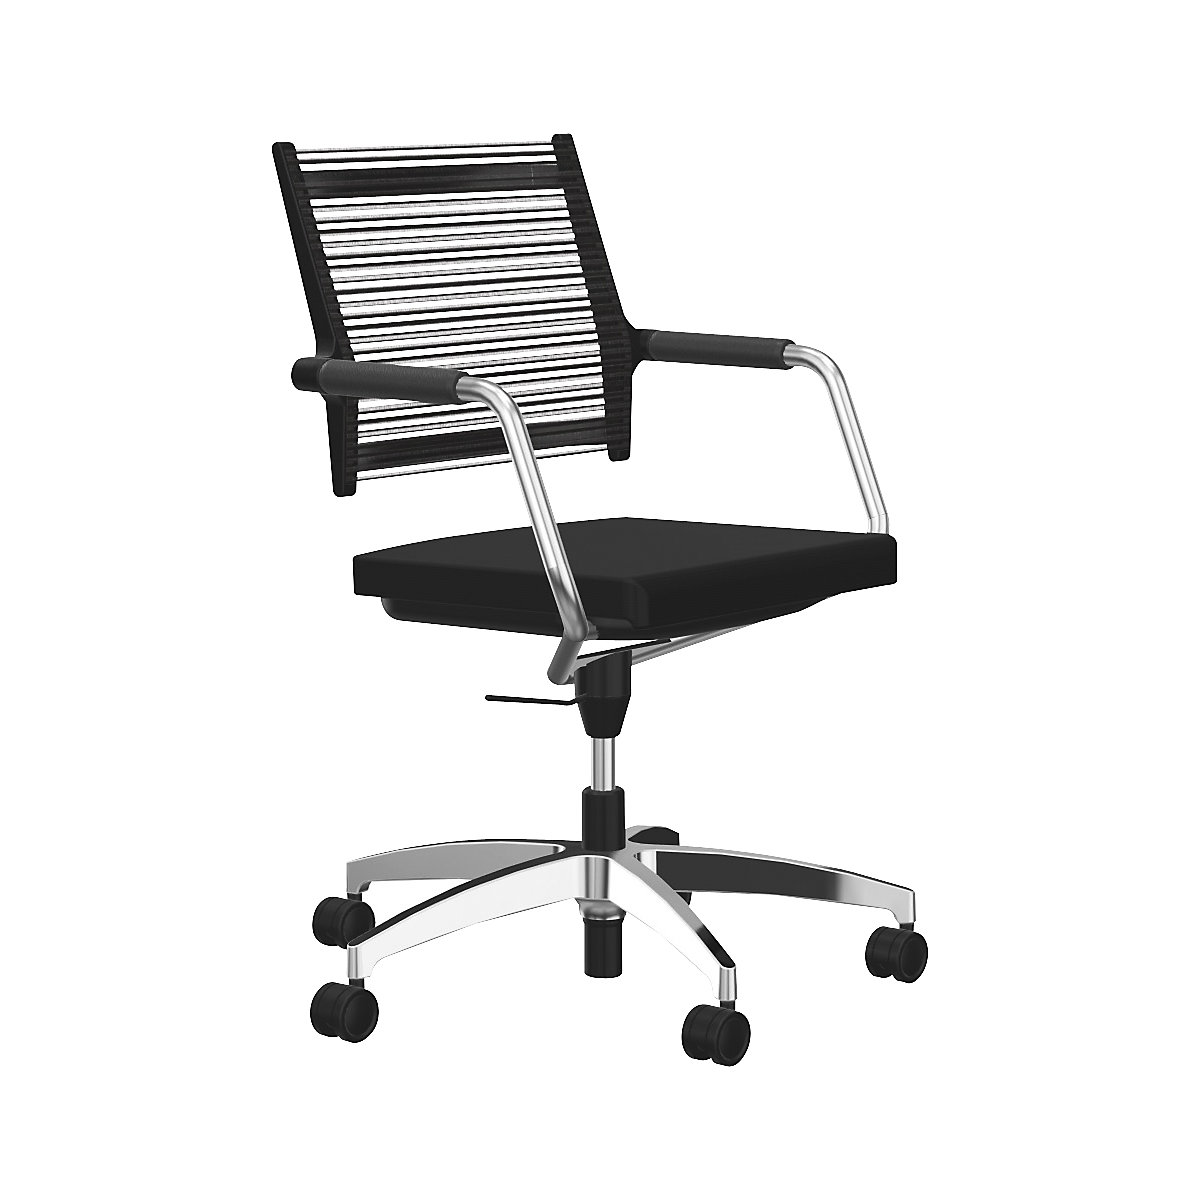 LORDO conference swivel chair – Dauphin